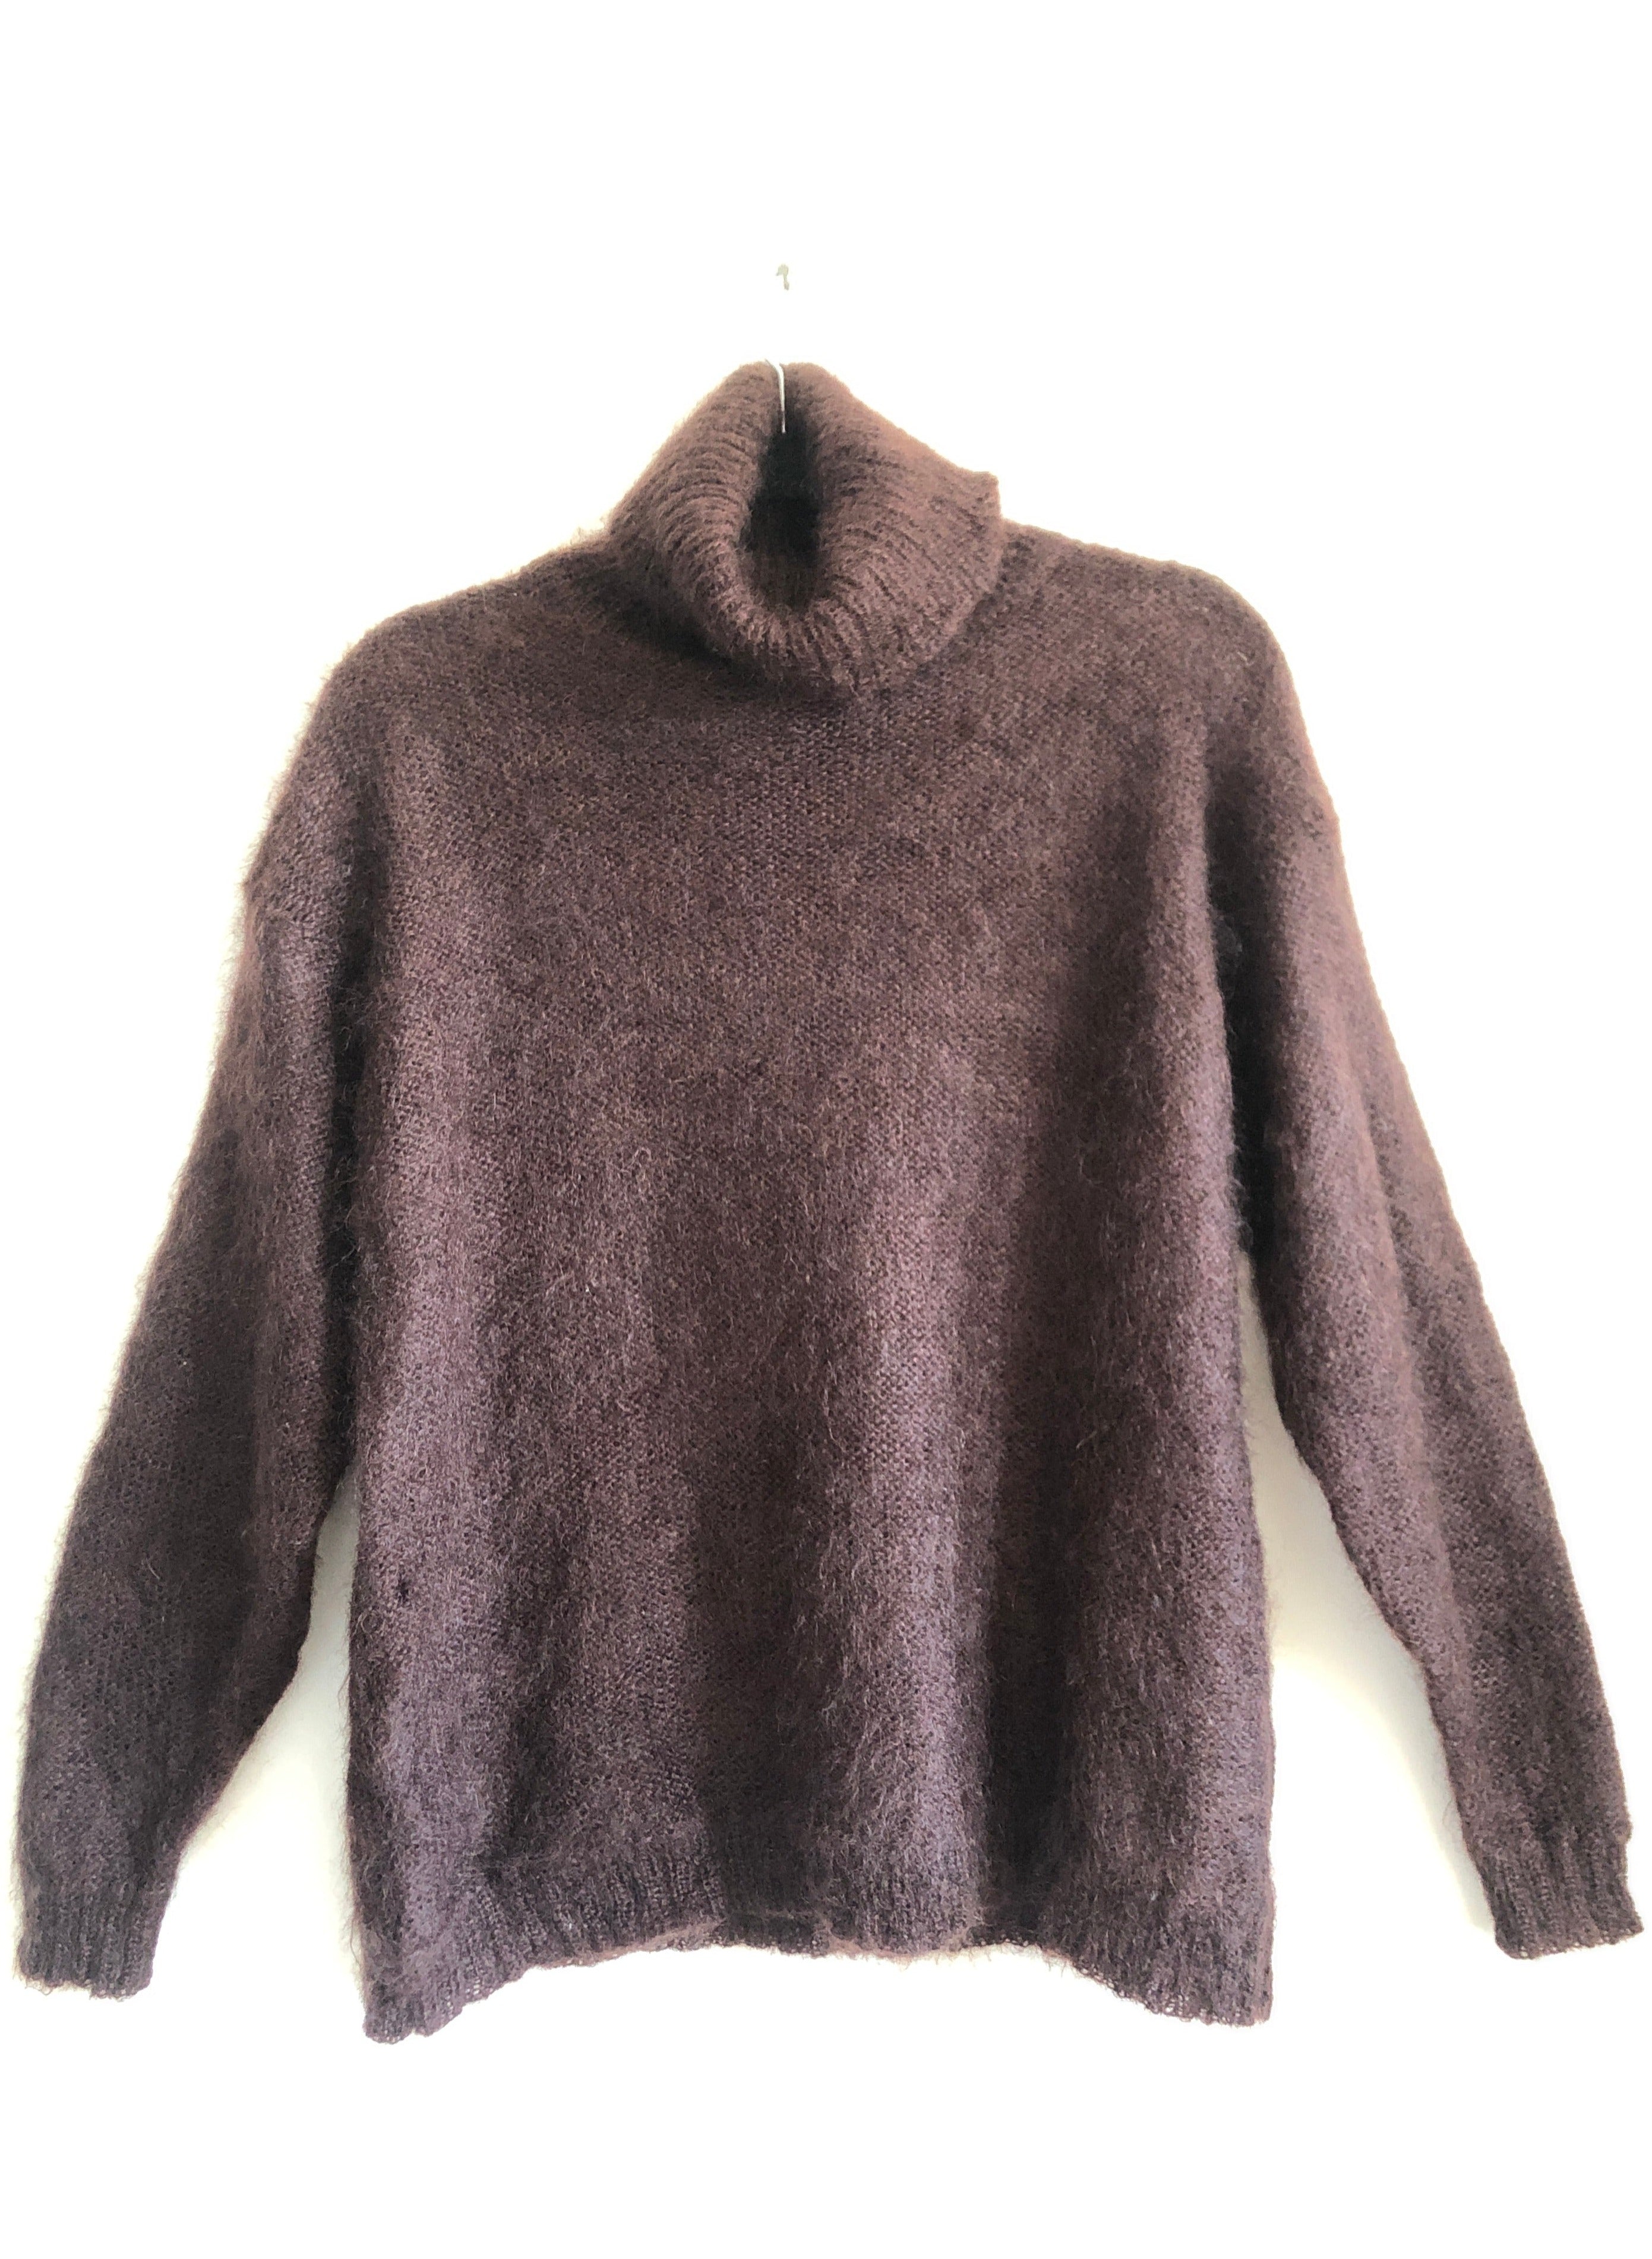 Brown Mohair Turtleneck Sweater, by Patti Pen, Size Large